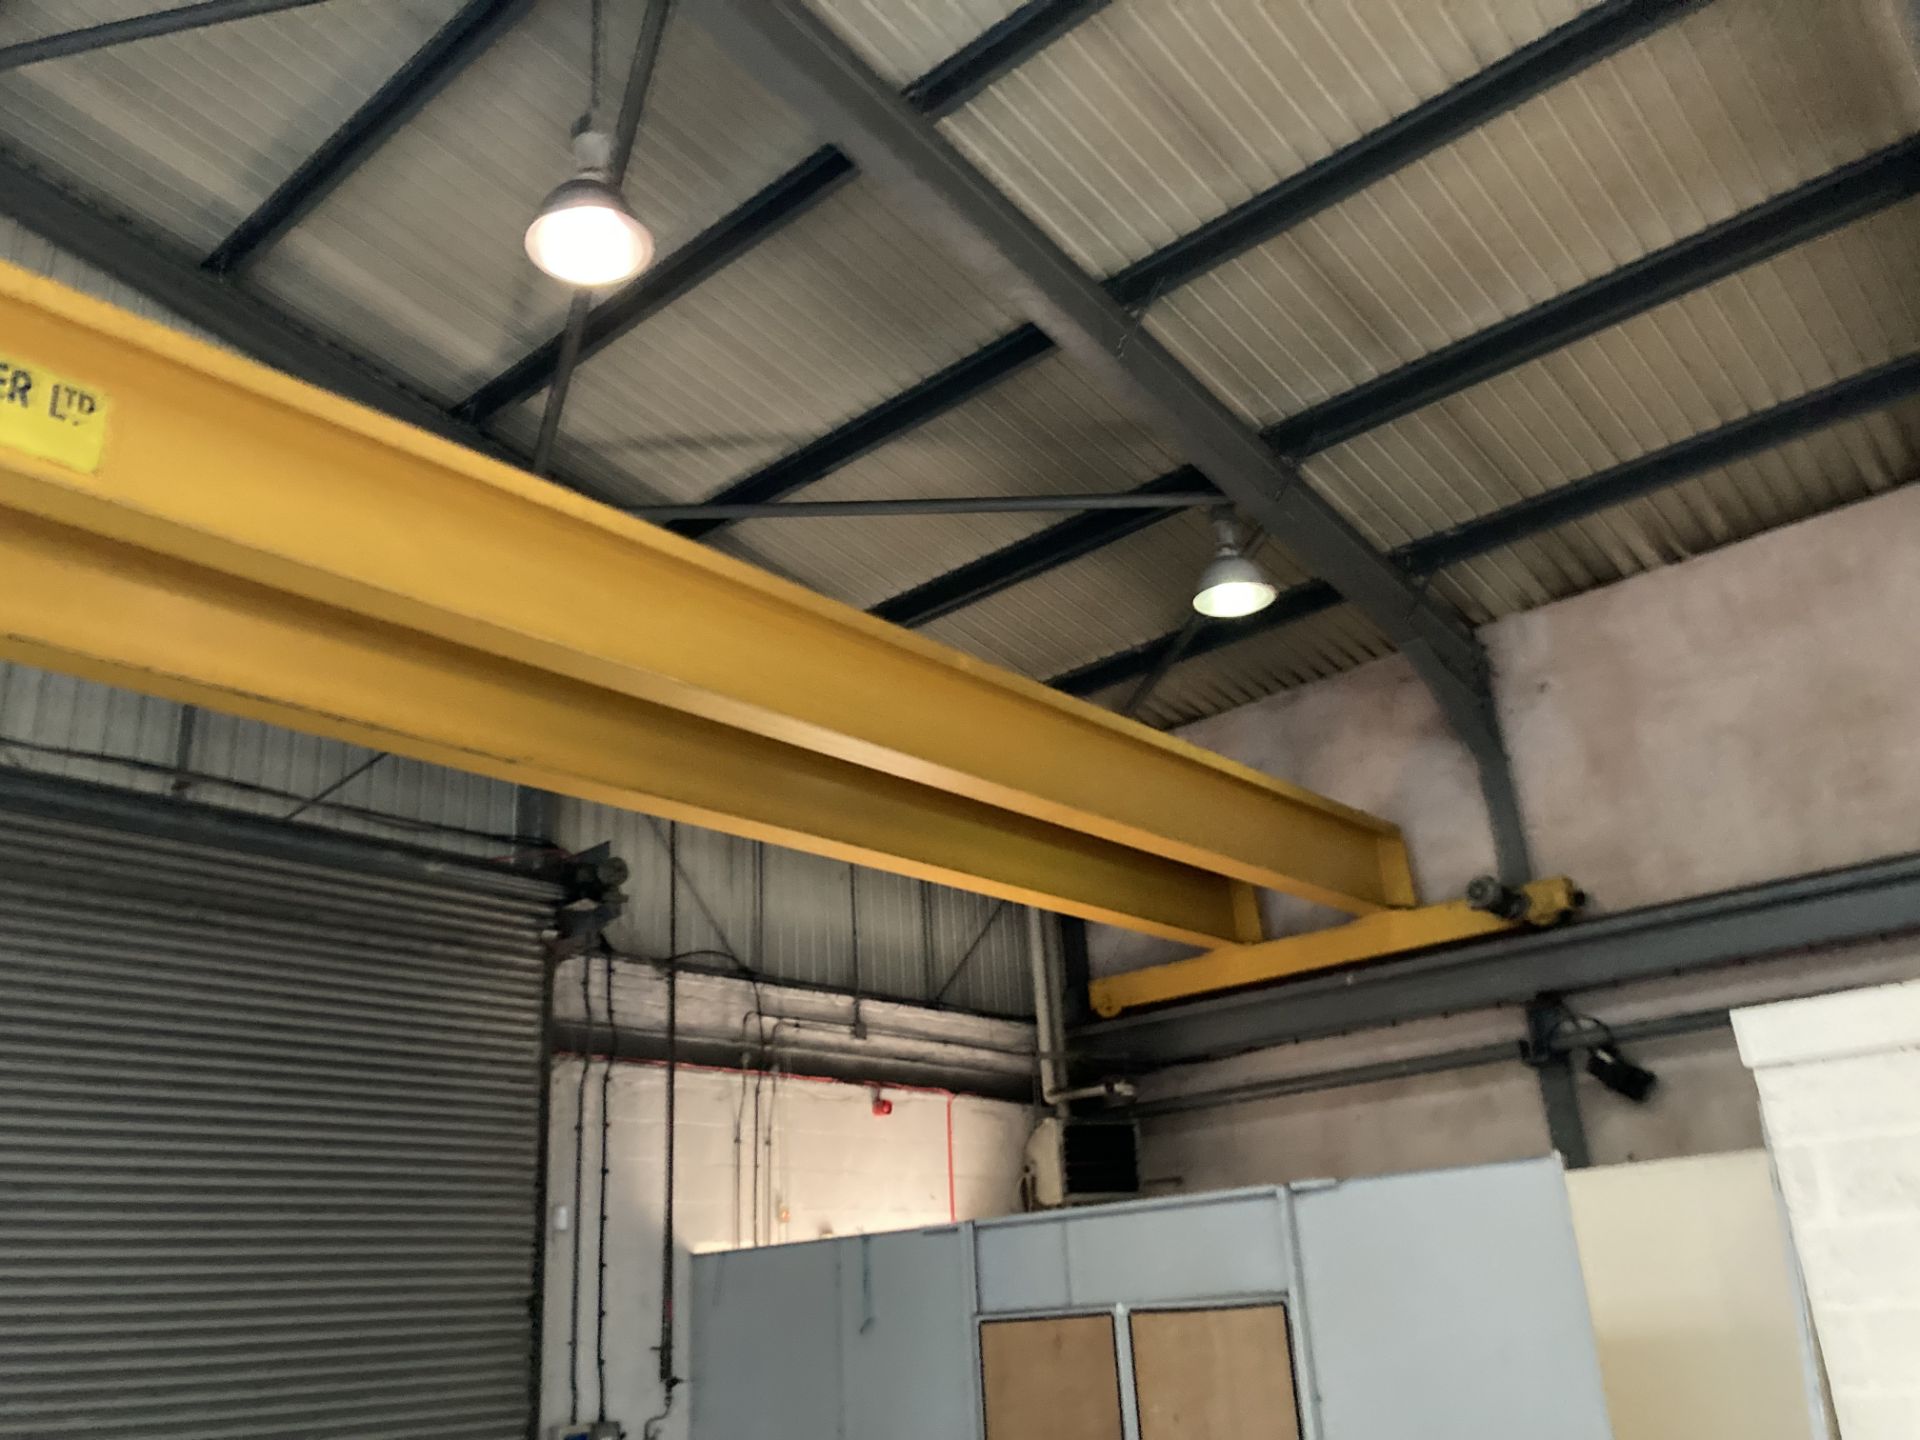 Fellows-Stringer 5 TON TWIN GIRDER OVERHEAD TRAVELLING CRANE, approx. width of crane – 19.11m x - Image 5 of 9